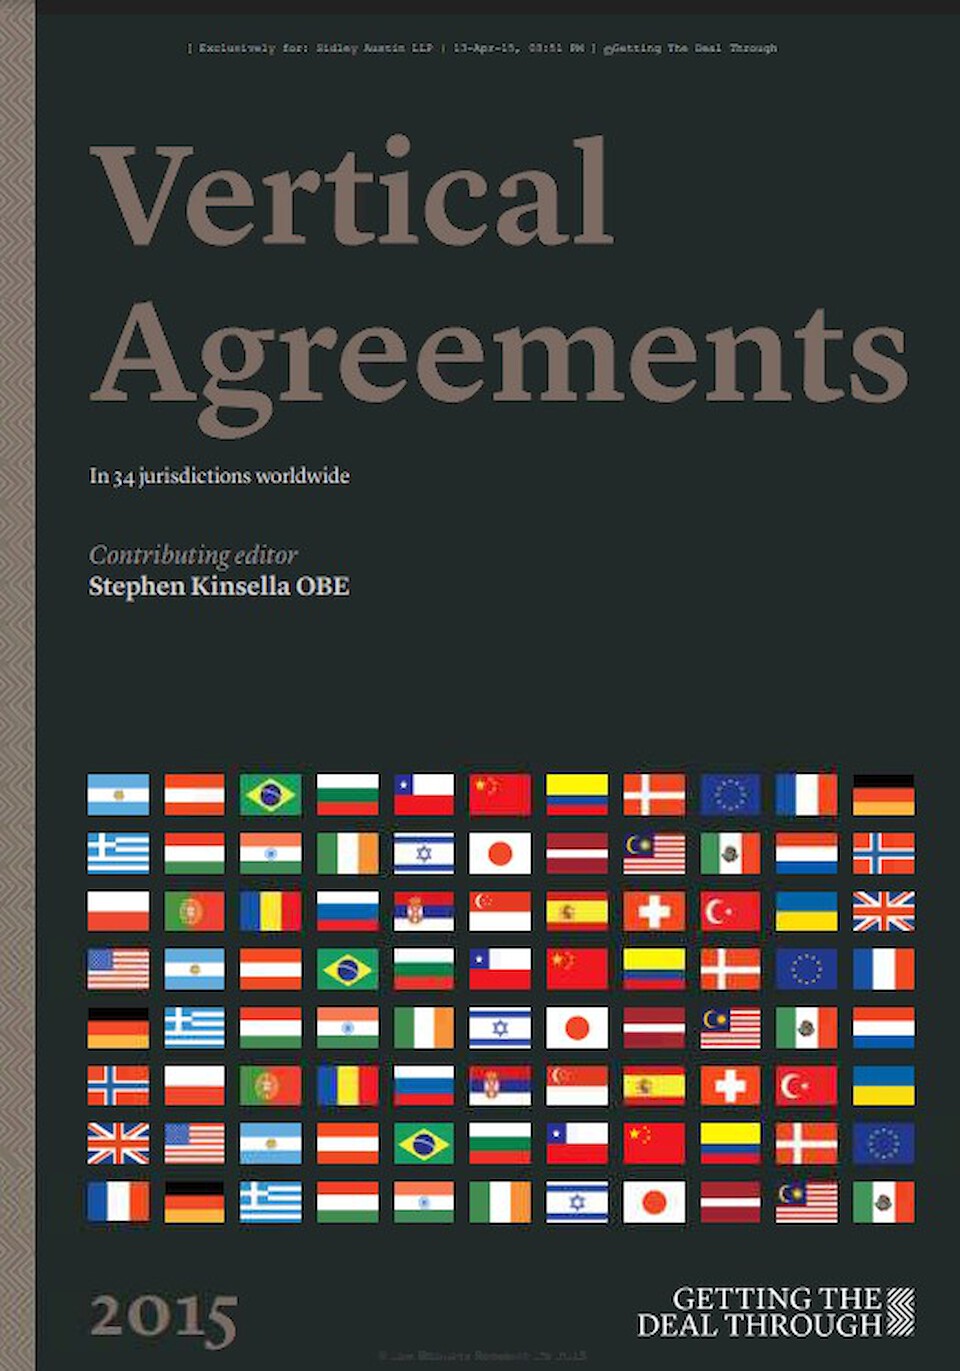 Getting the deal through: Vertical agreements - Romania